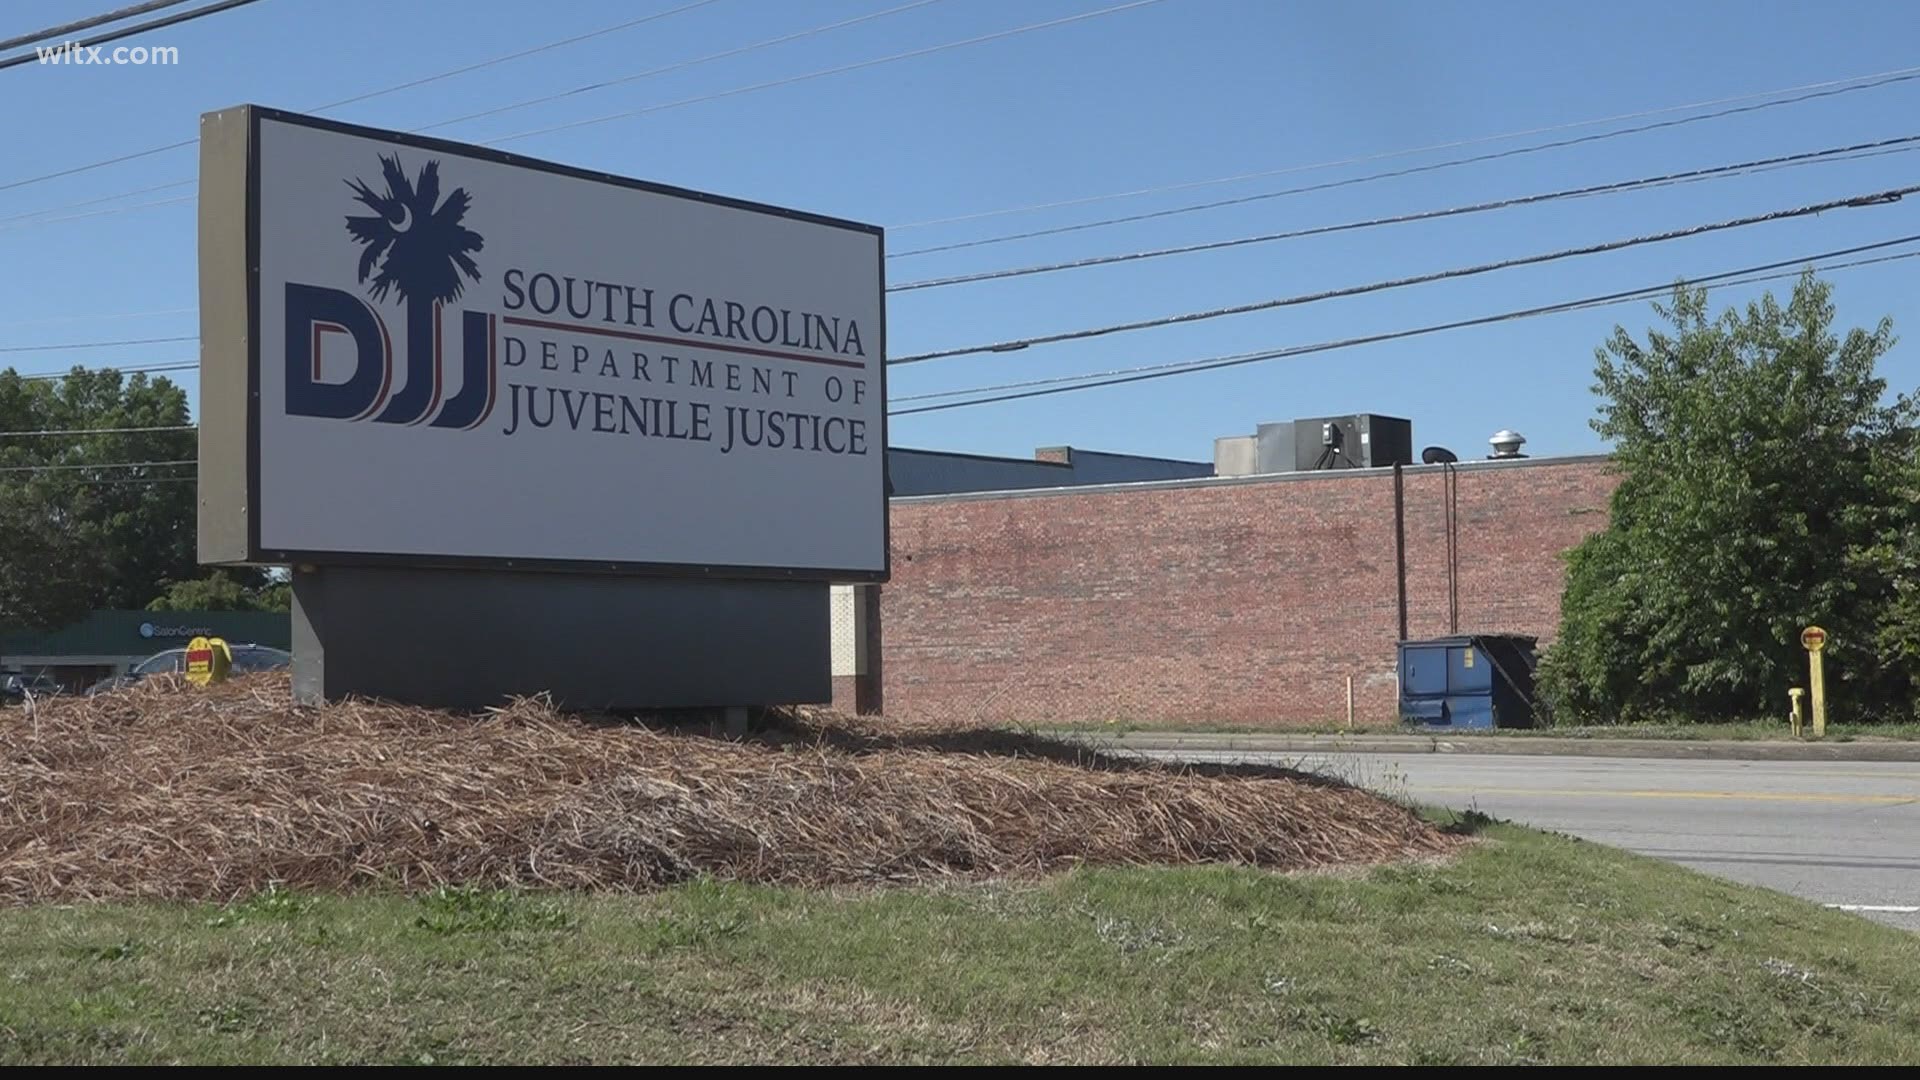 The report identifies problems in staffing, training, and security at SC Department of Juvenile Justice facilities.